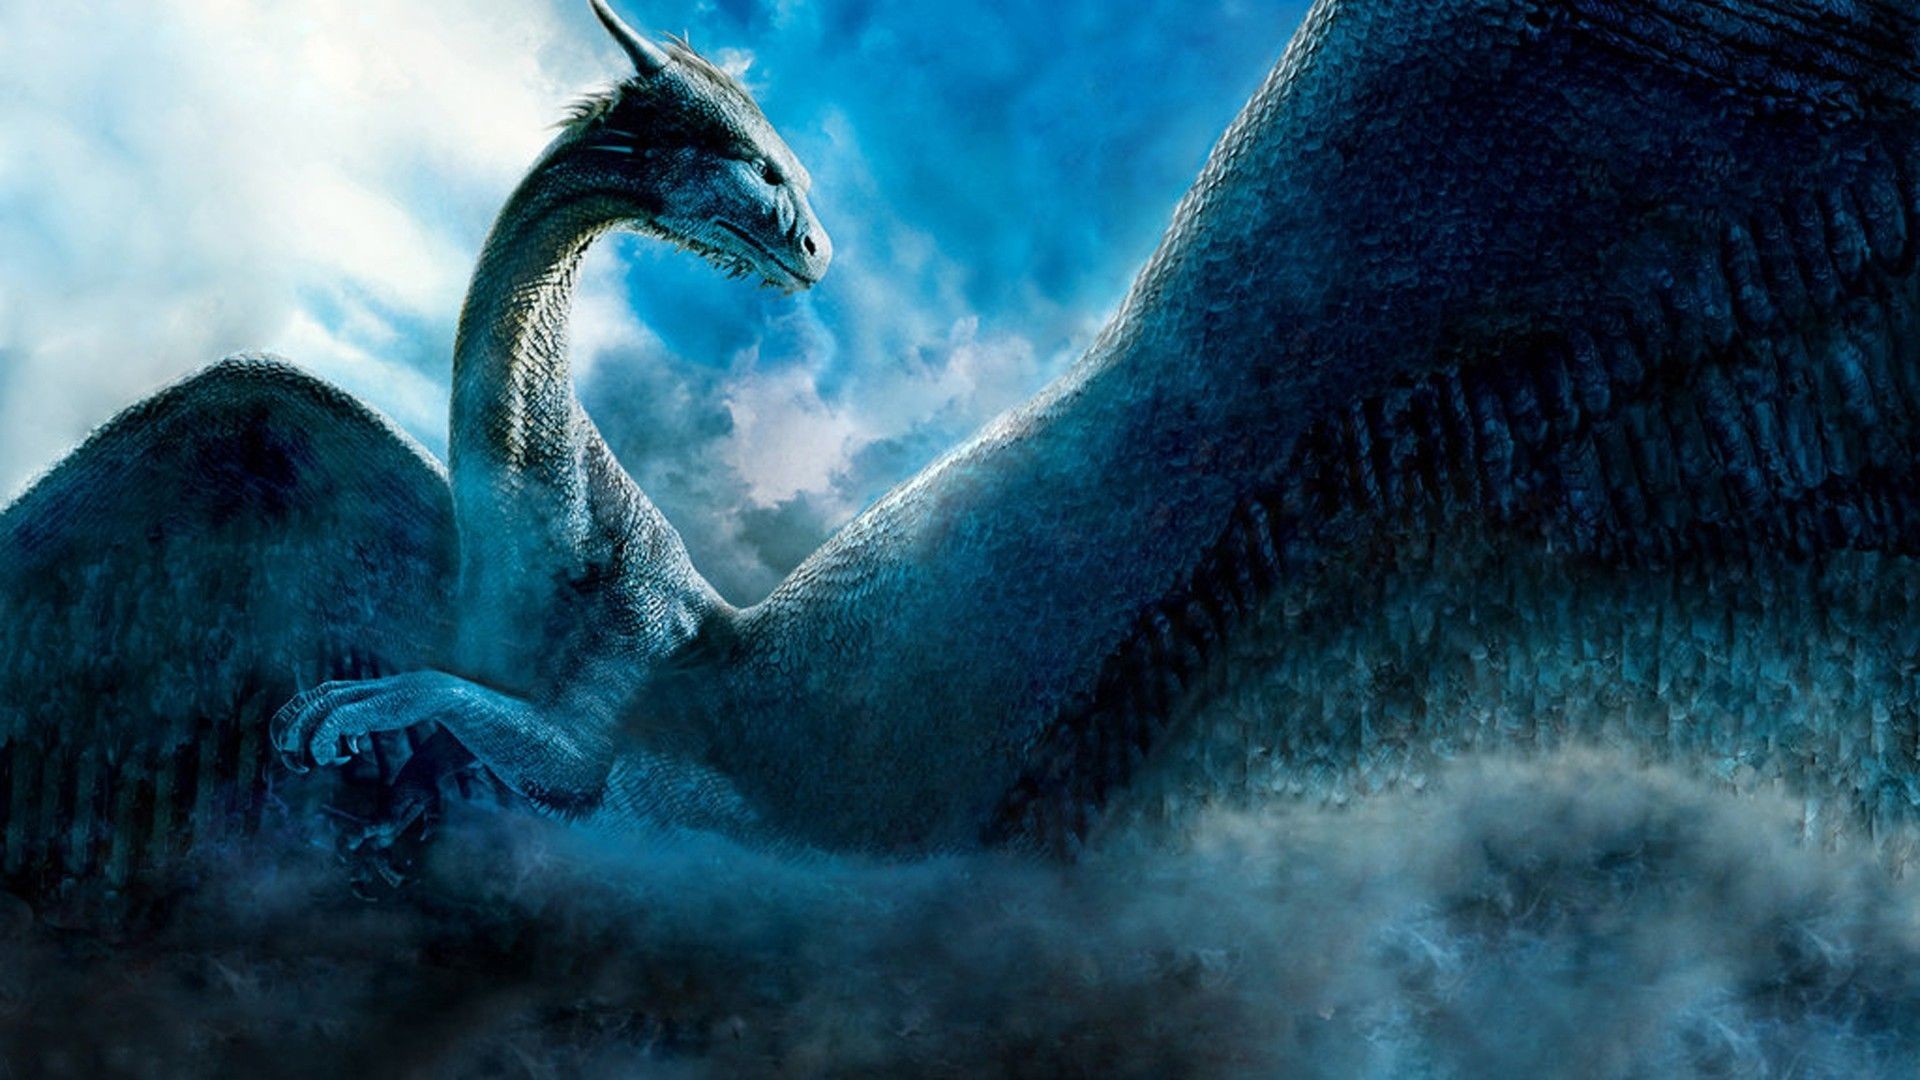 1920x1080  ... dragon hd wallpapers 1080p on wallpaperget com .